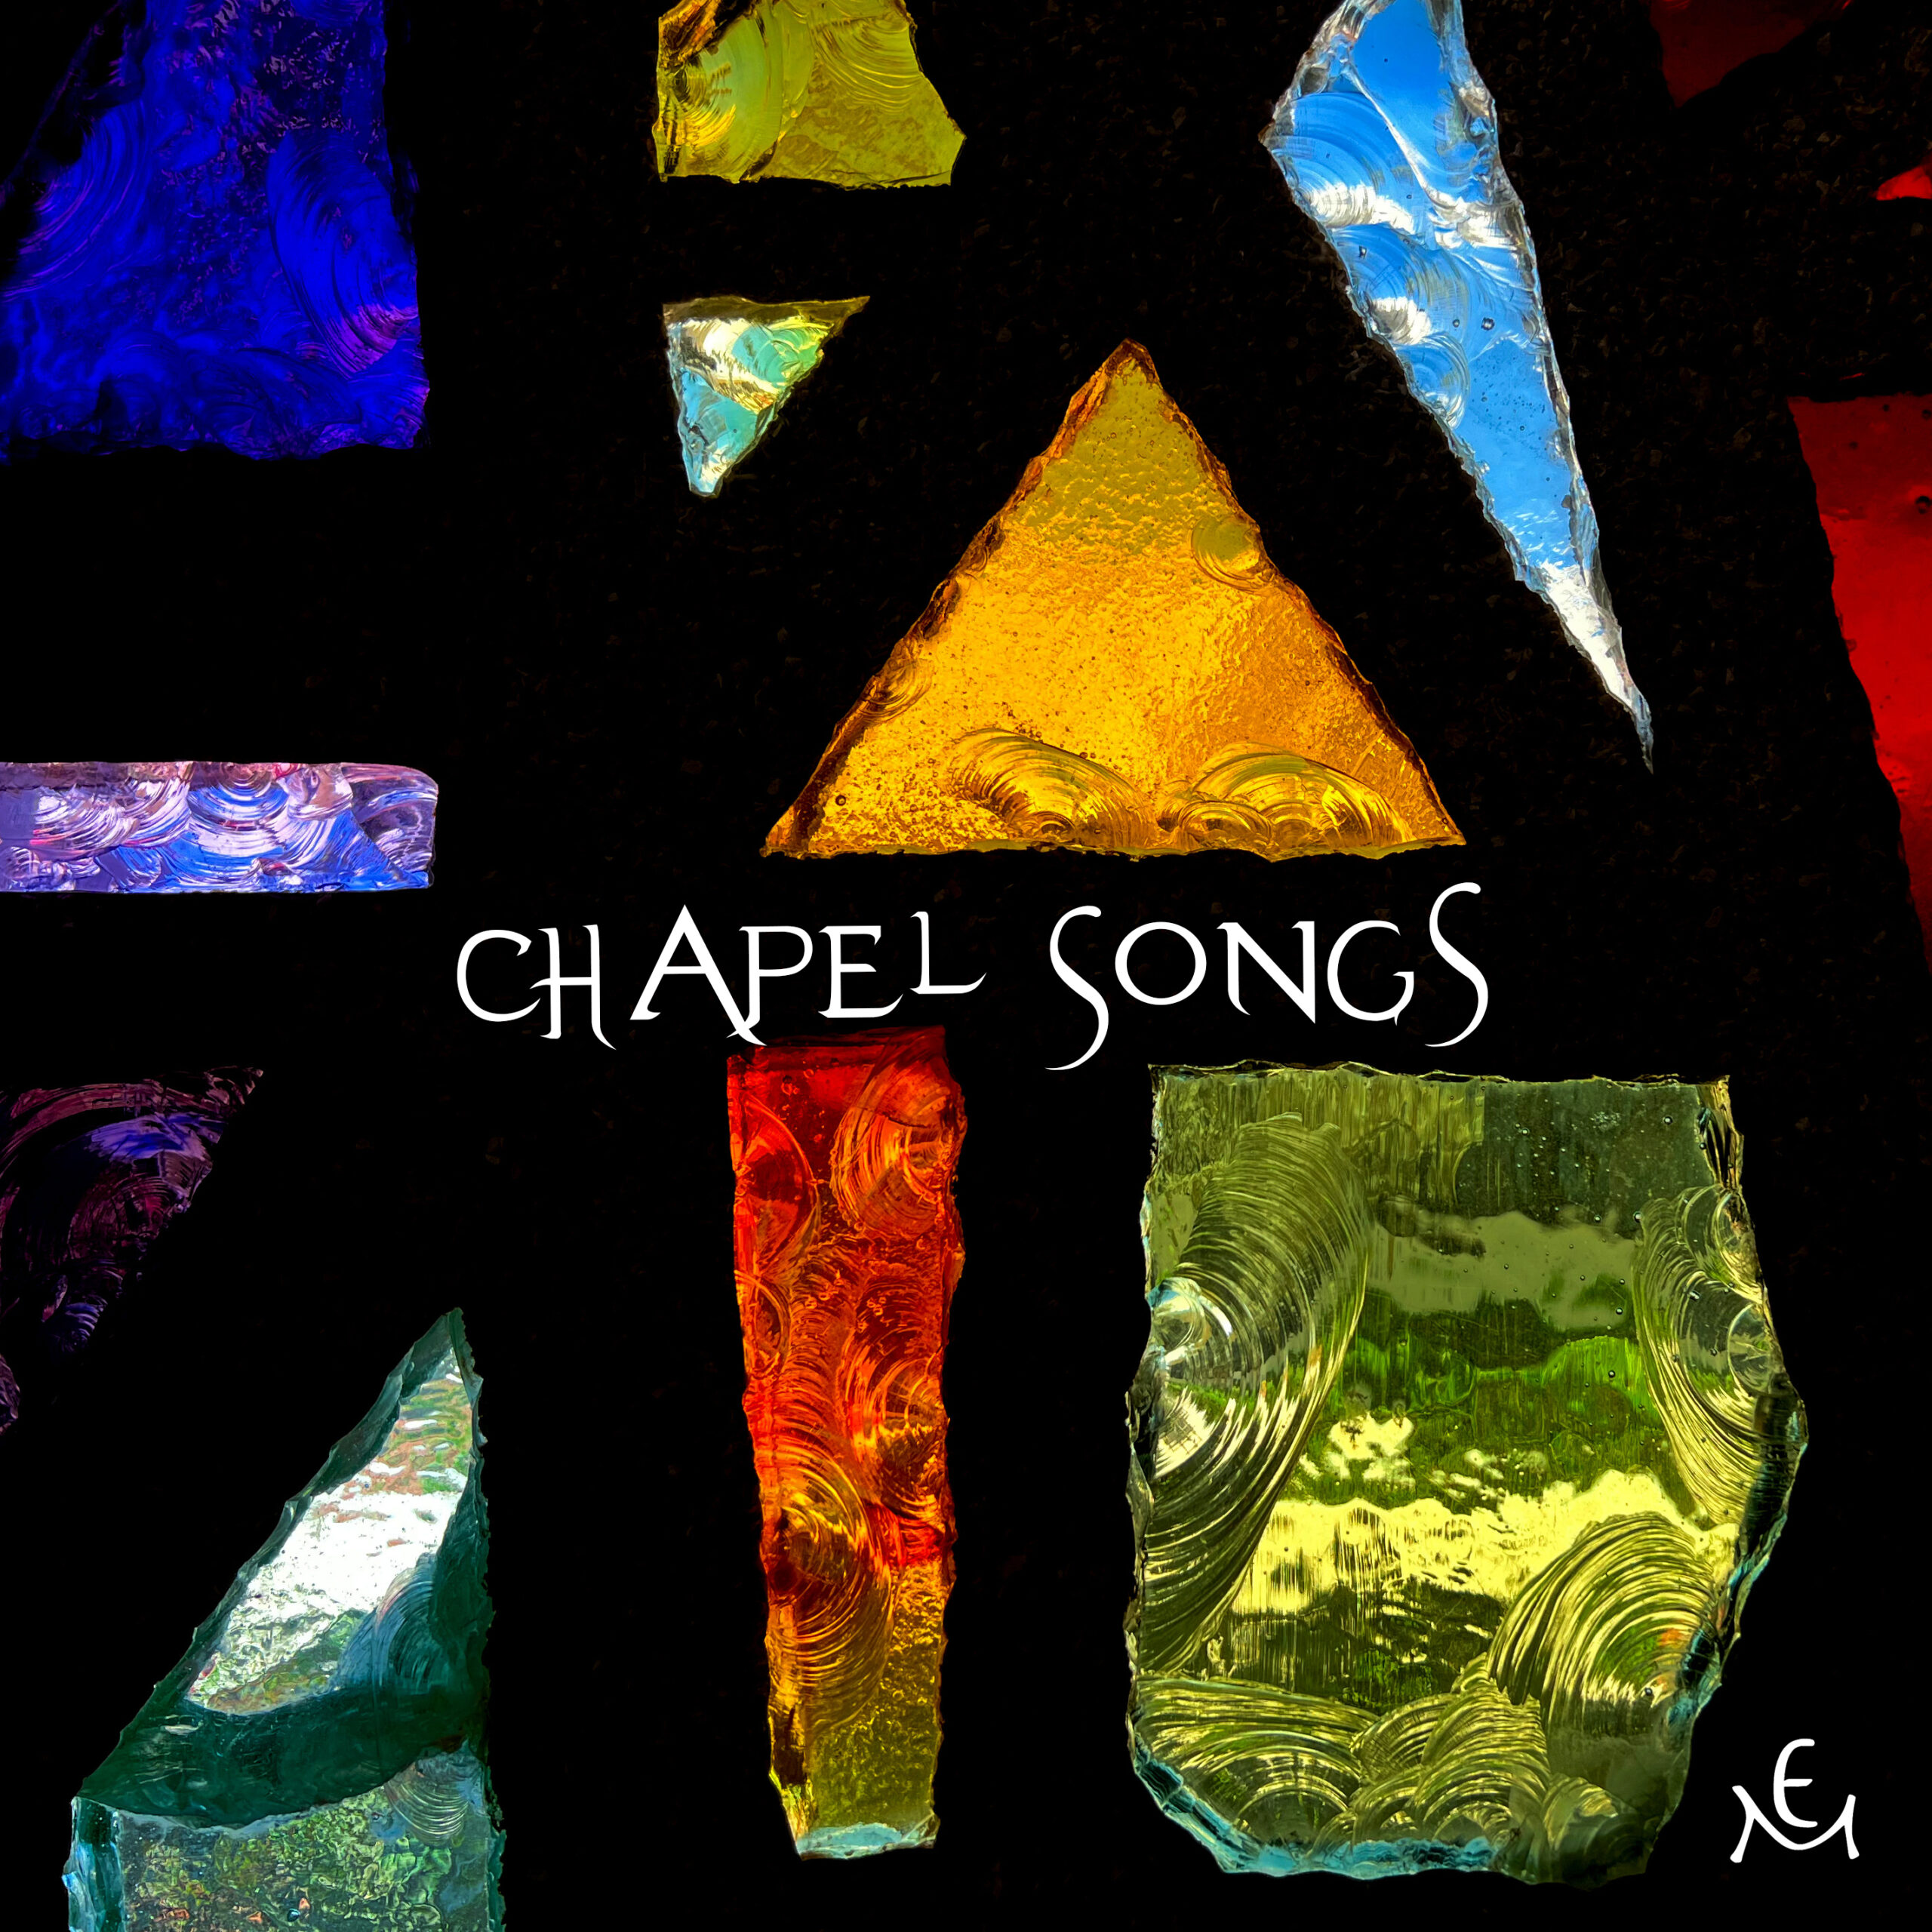 Eddy Mann’s “Chapel Songs”: A Melodic Celebration of Cultural and Spiritual Diversity